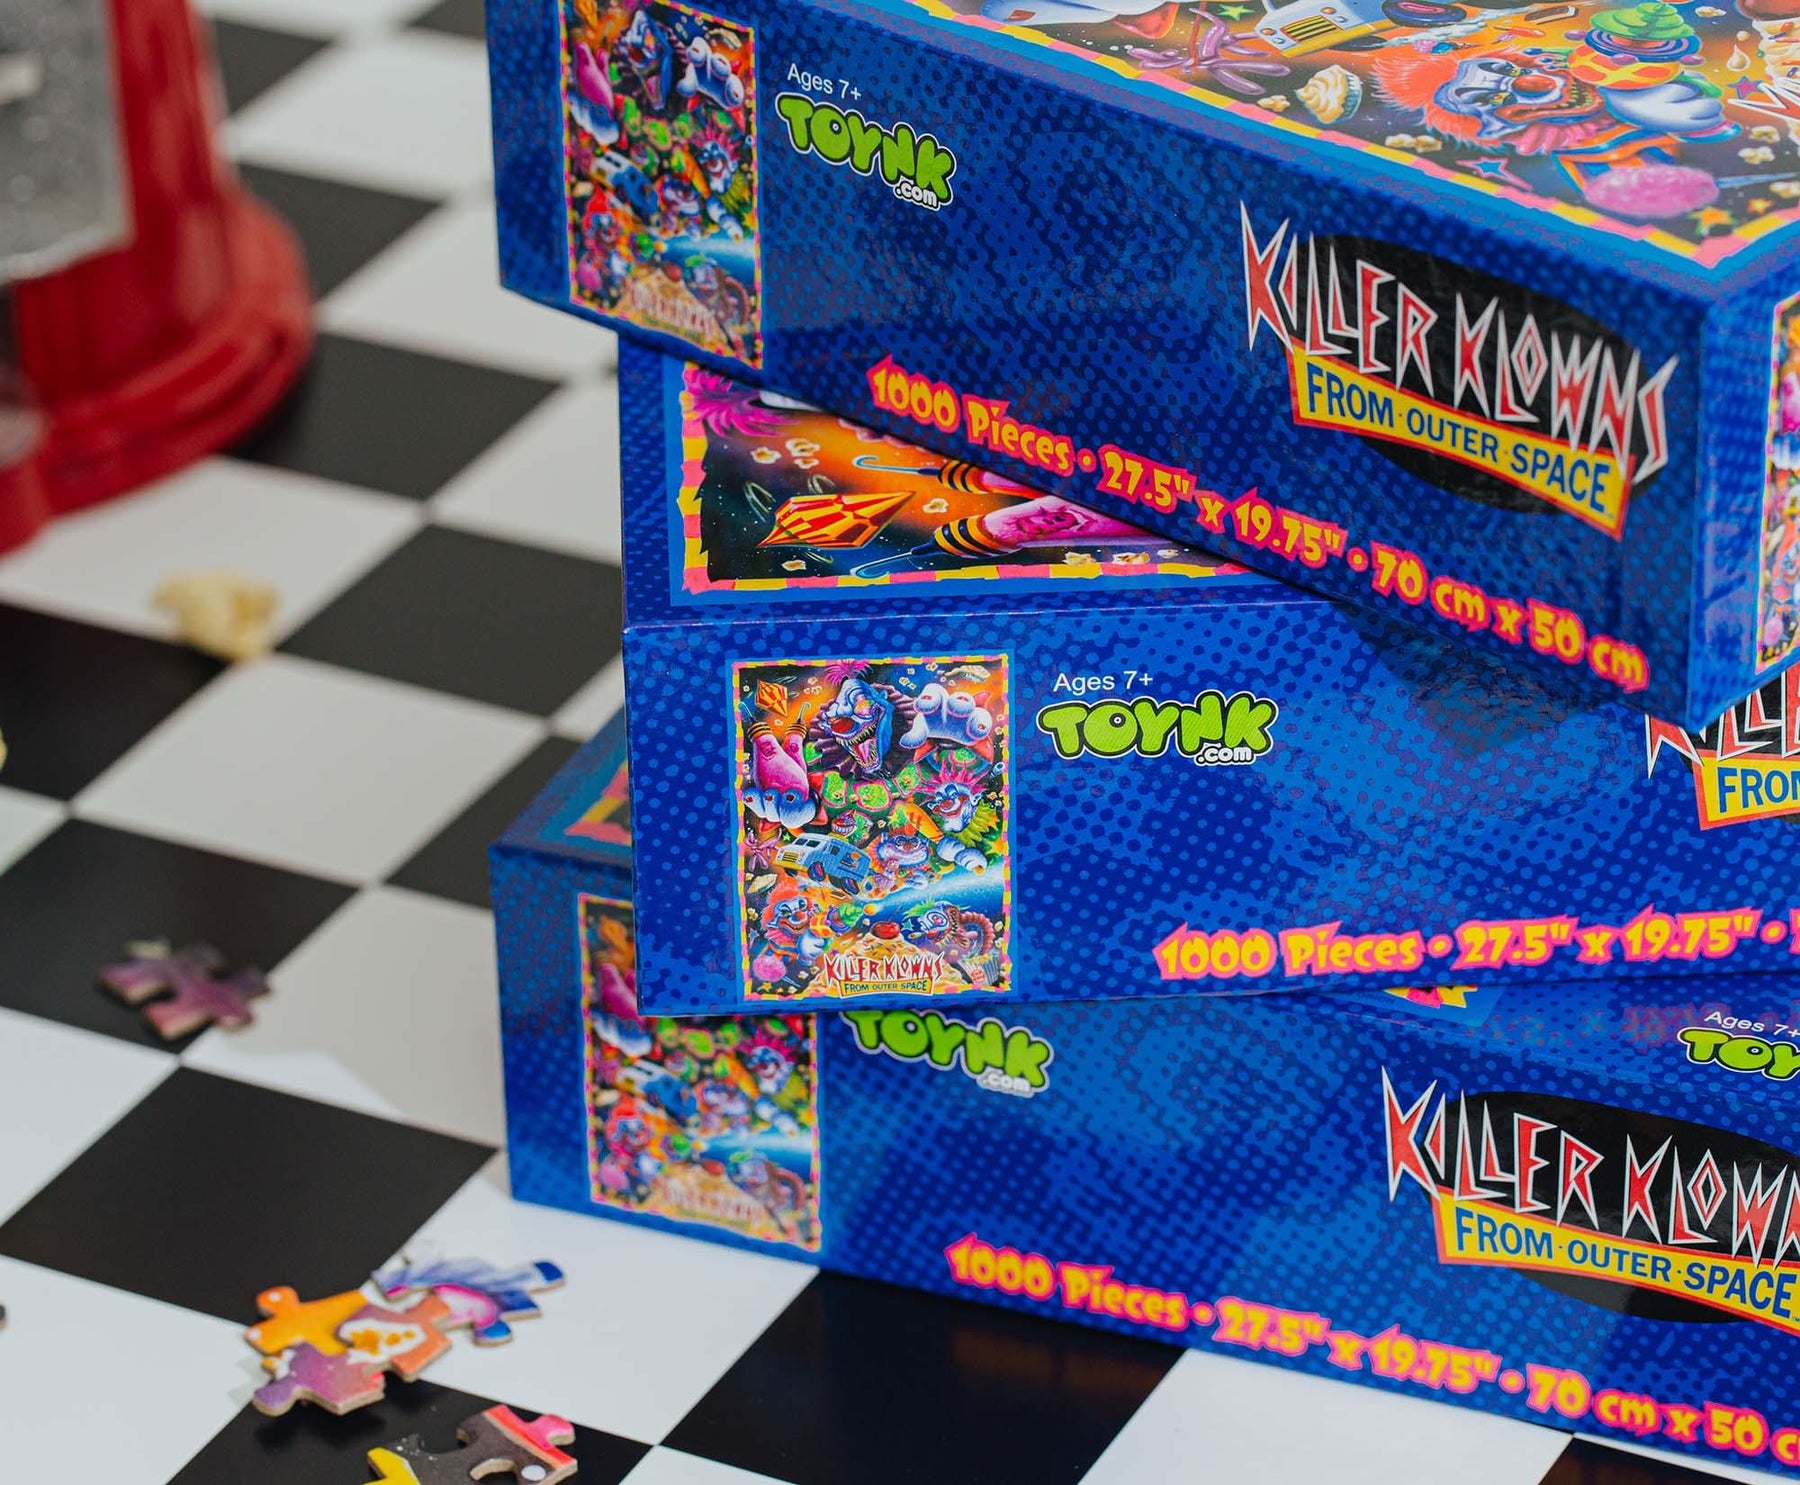 Killer Klowns From Outer Space 1000-Piece Jigsaw Puzzle | Toynk Exclusive